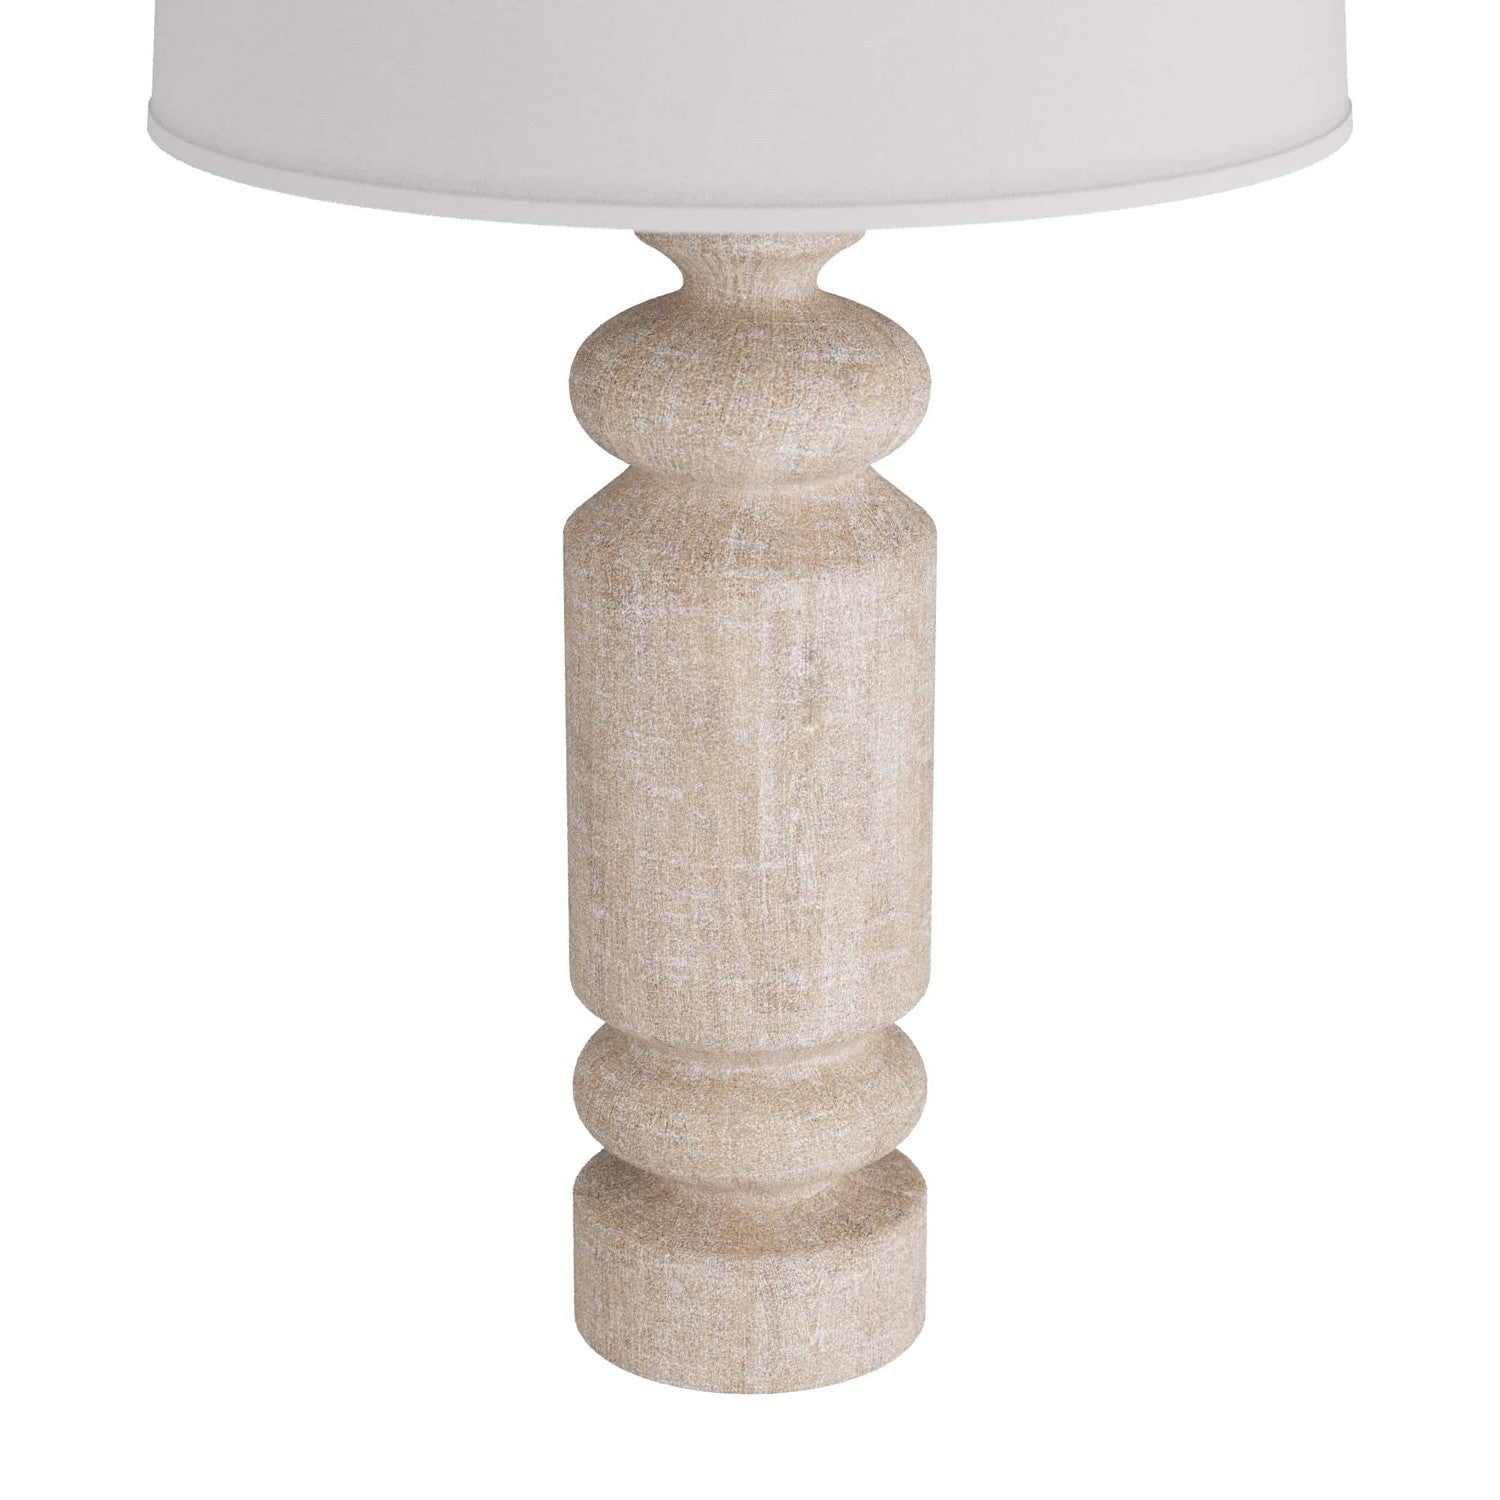 One Light Table Lamp from the Woodrow collection in Limewash finish